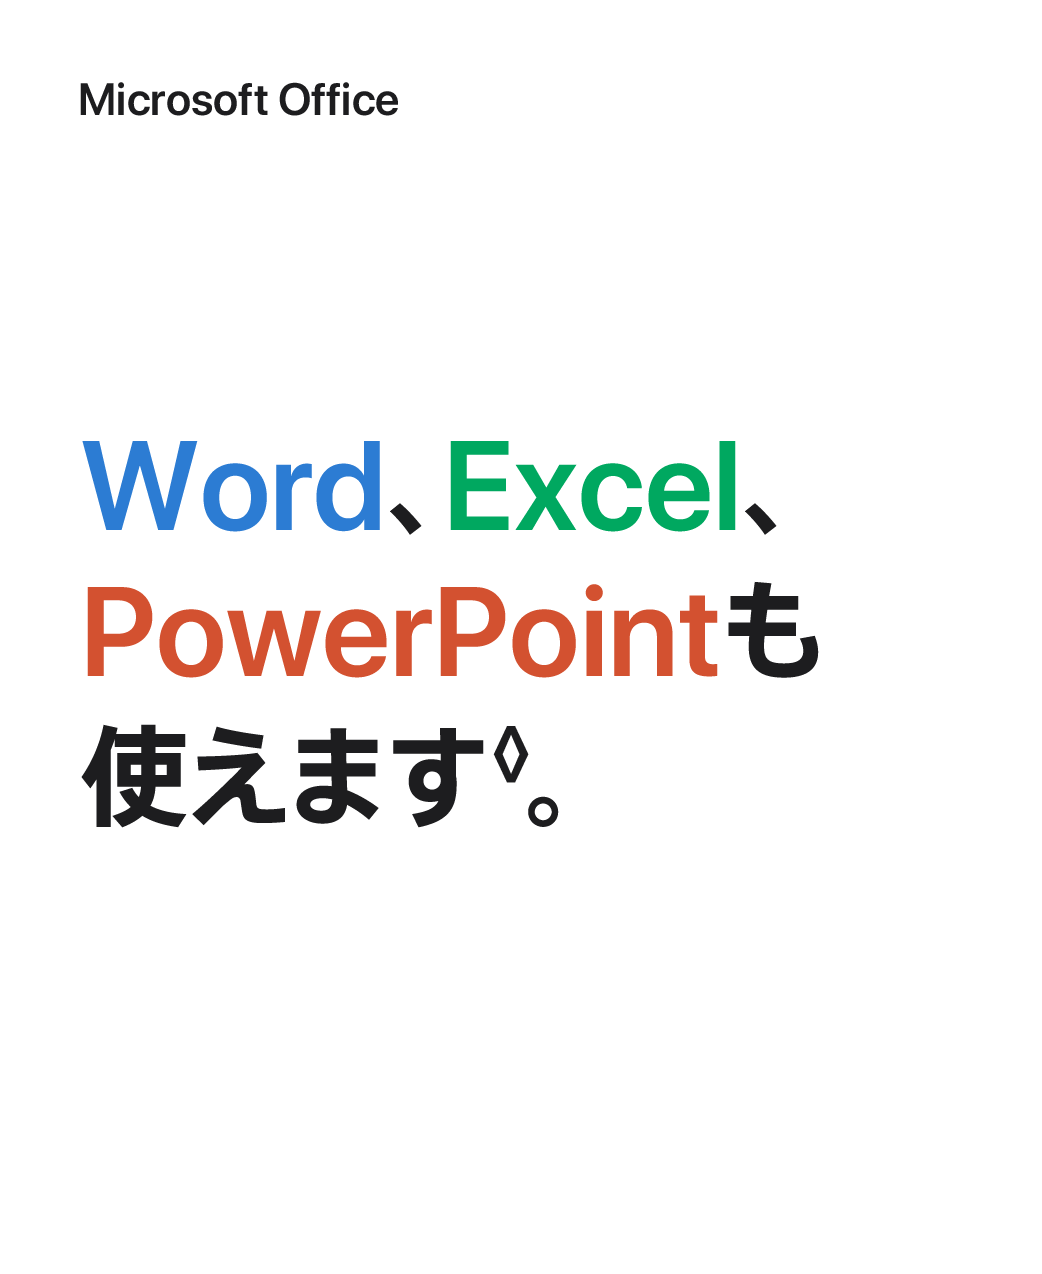 Microsoft Office Word、Excel、PowerPointも使えます。